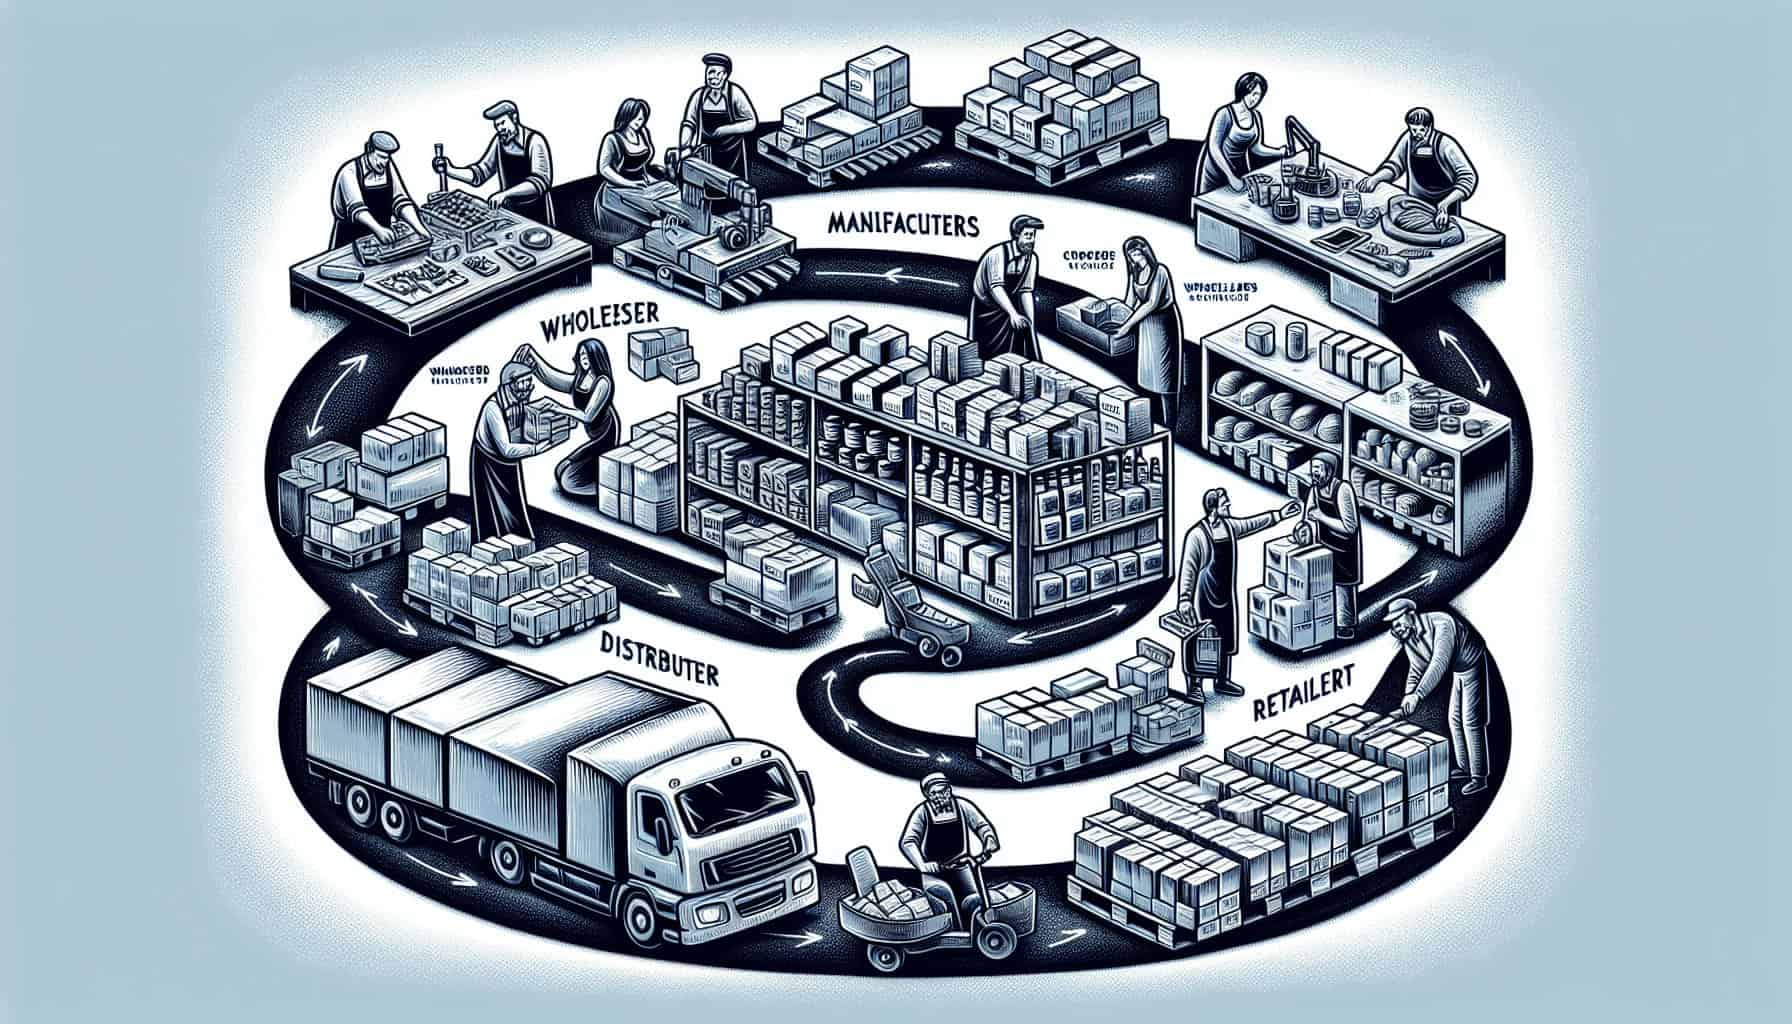 Illustration of key players in wholesale distribution